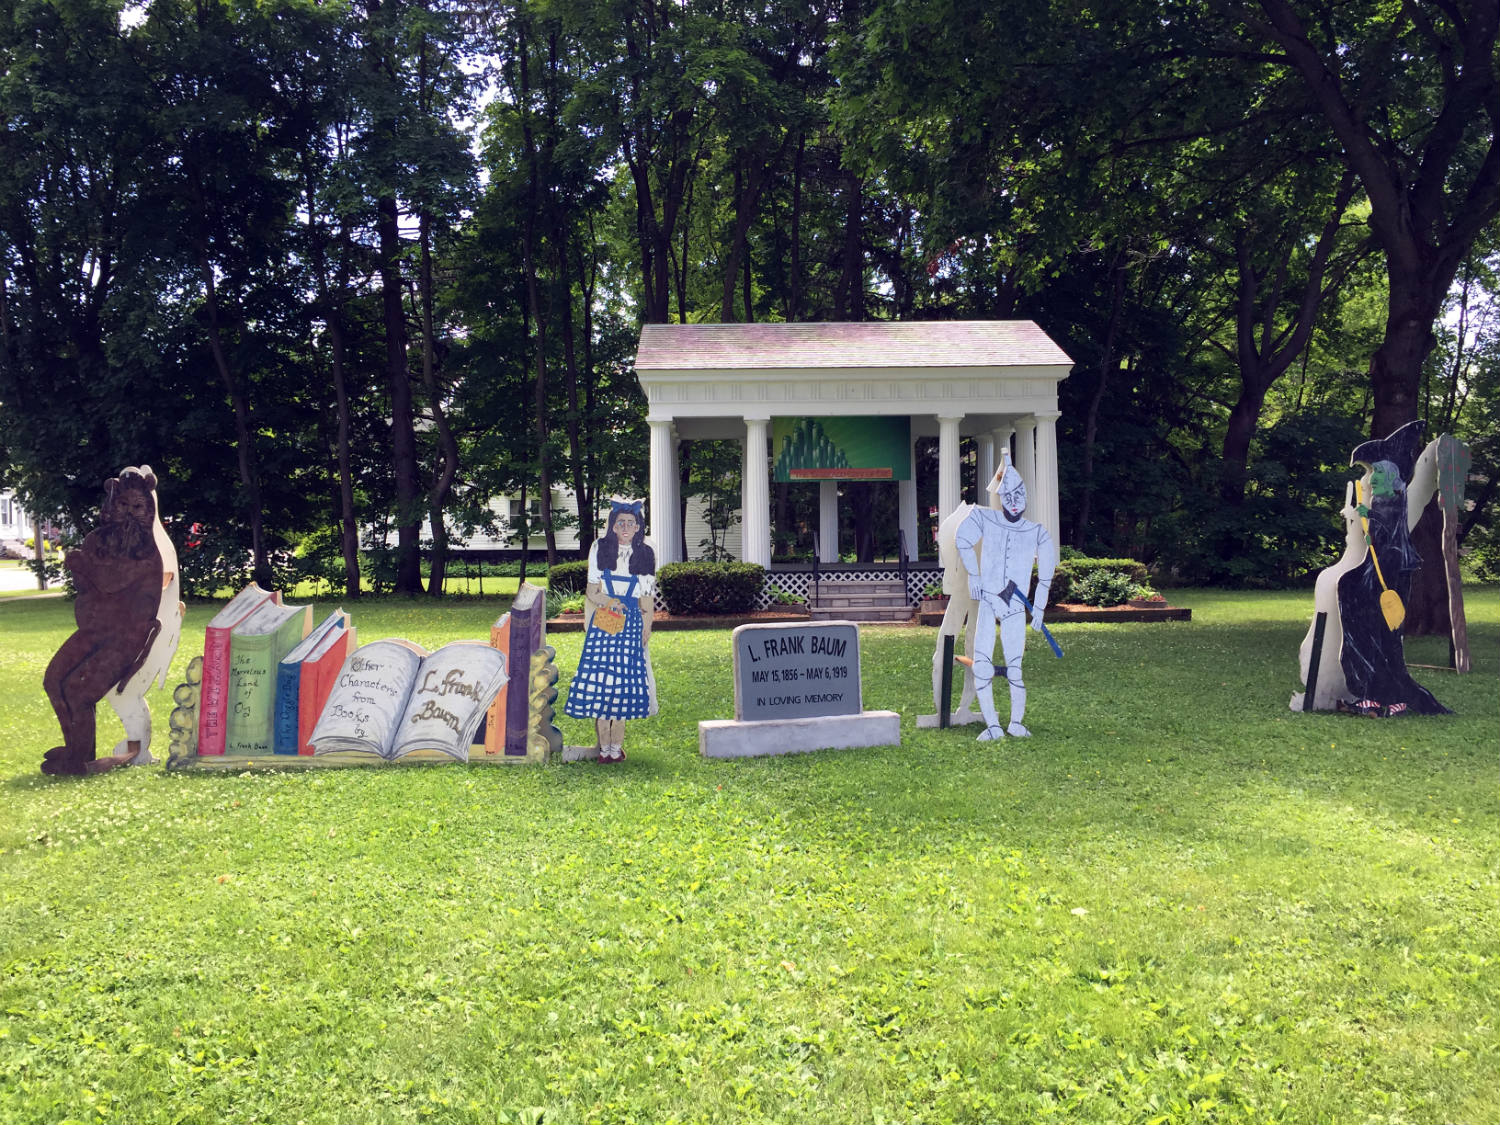 Park Setting with Wizard of Oz Characters in Chittenango, New York